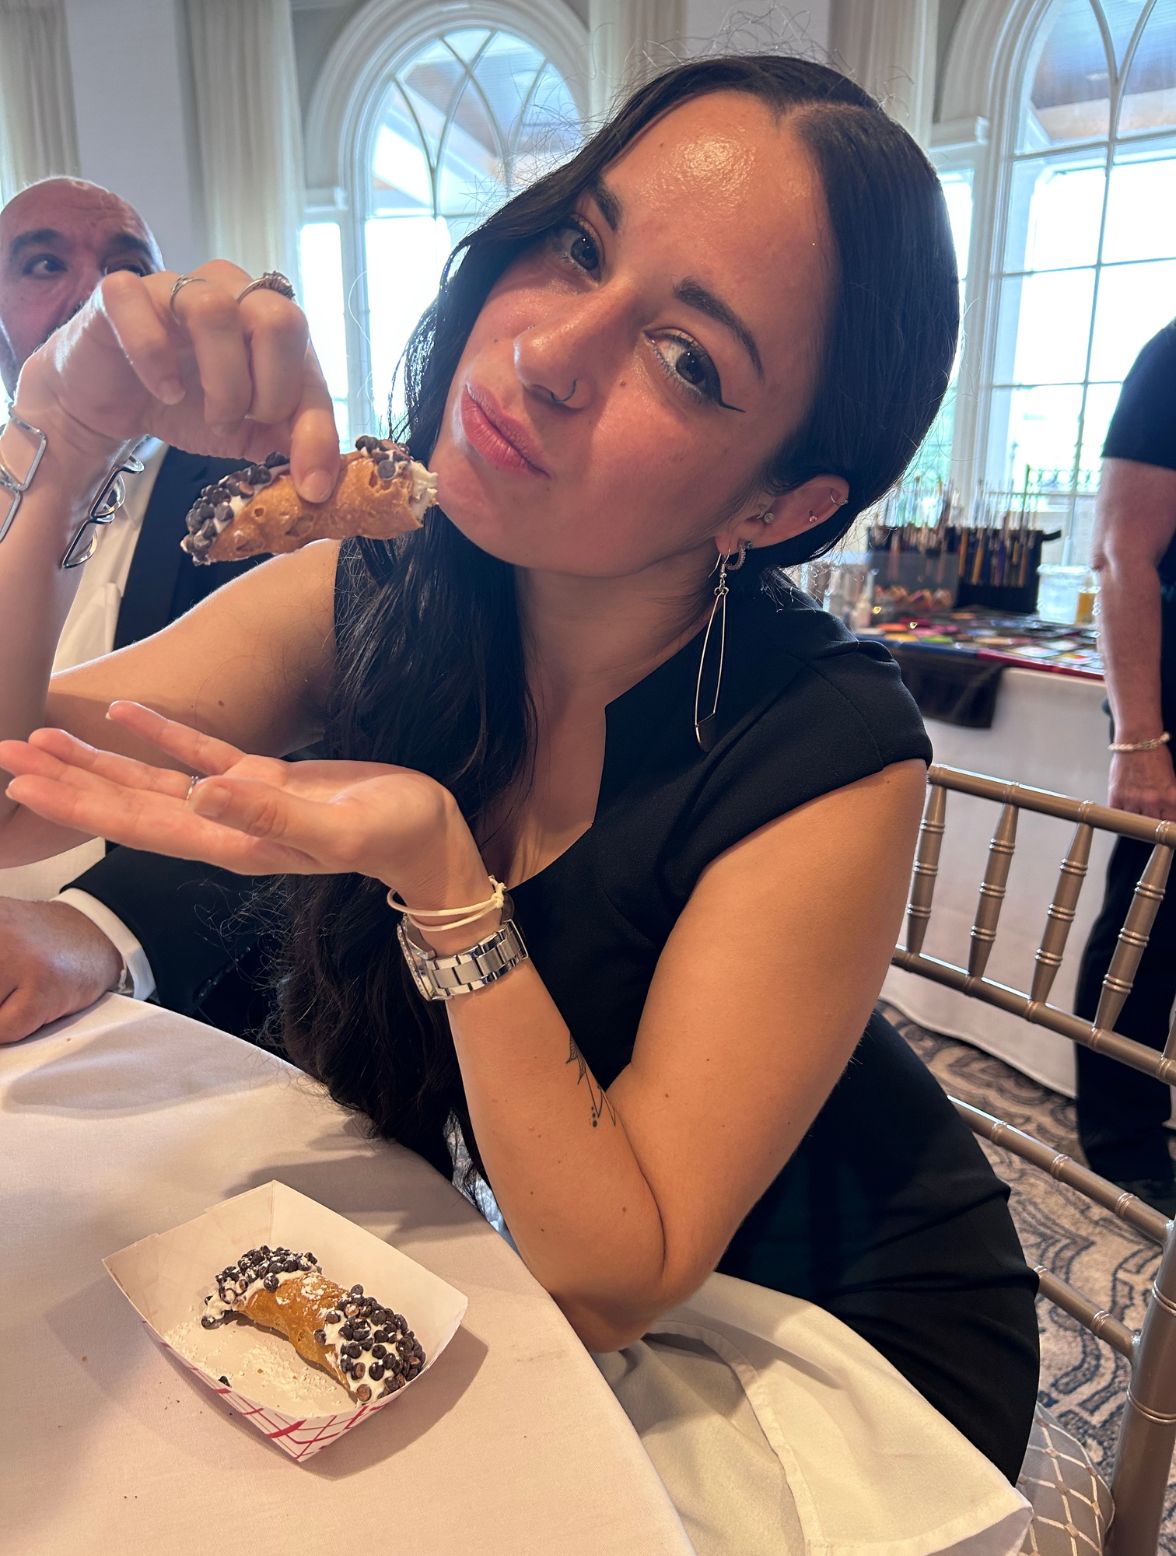 Brittany holding a cannoli